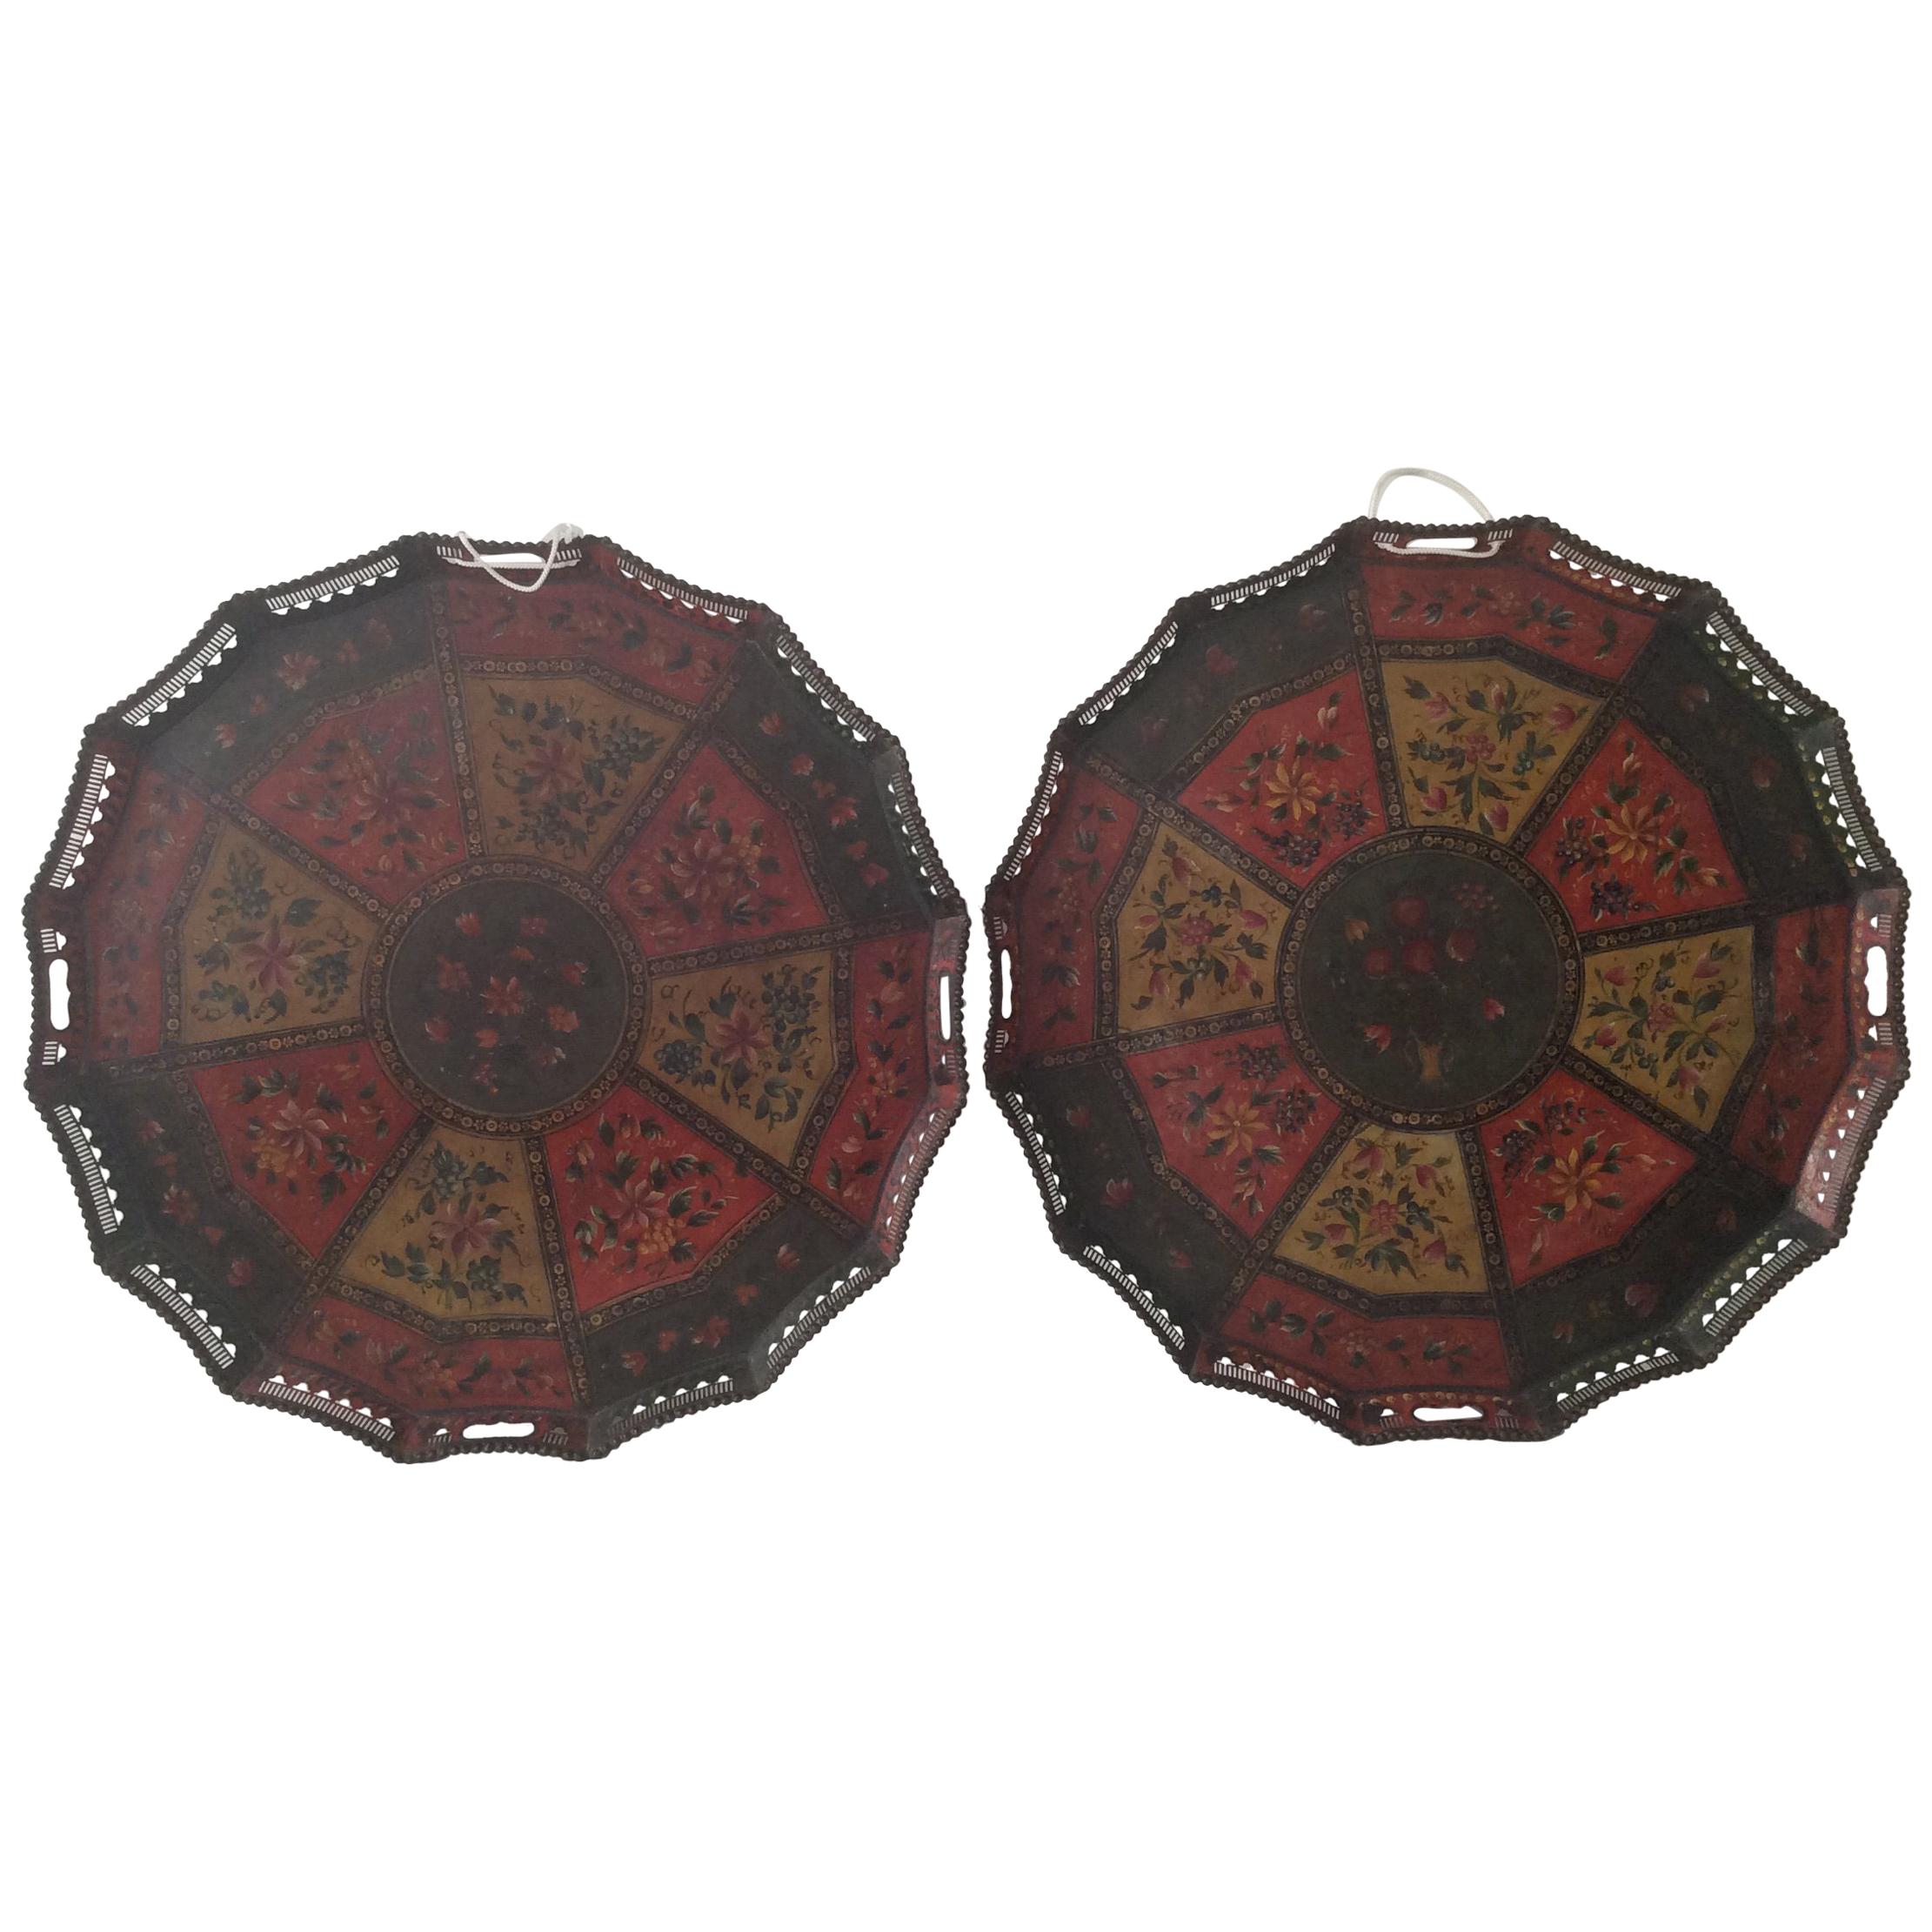 Rare Pair of Polychrome Painted Russian Tole Trays